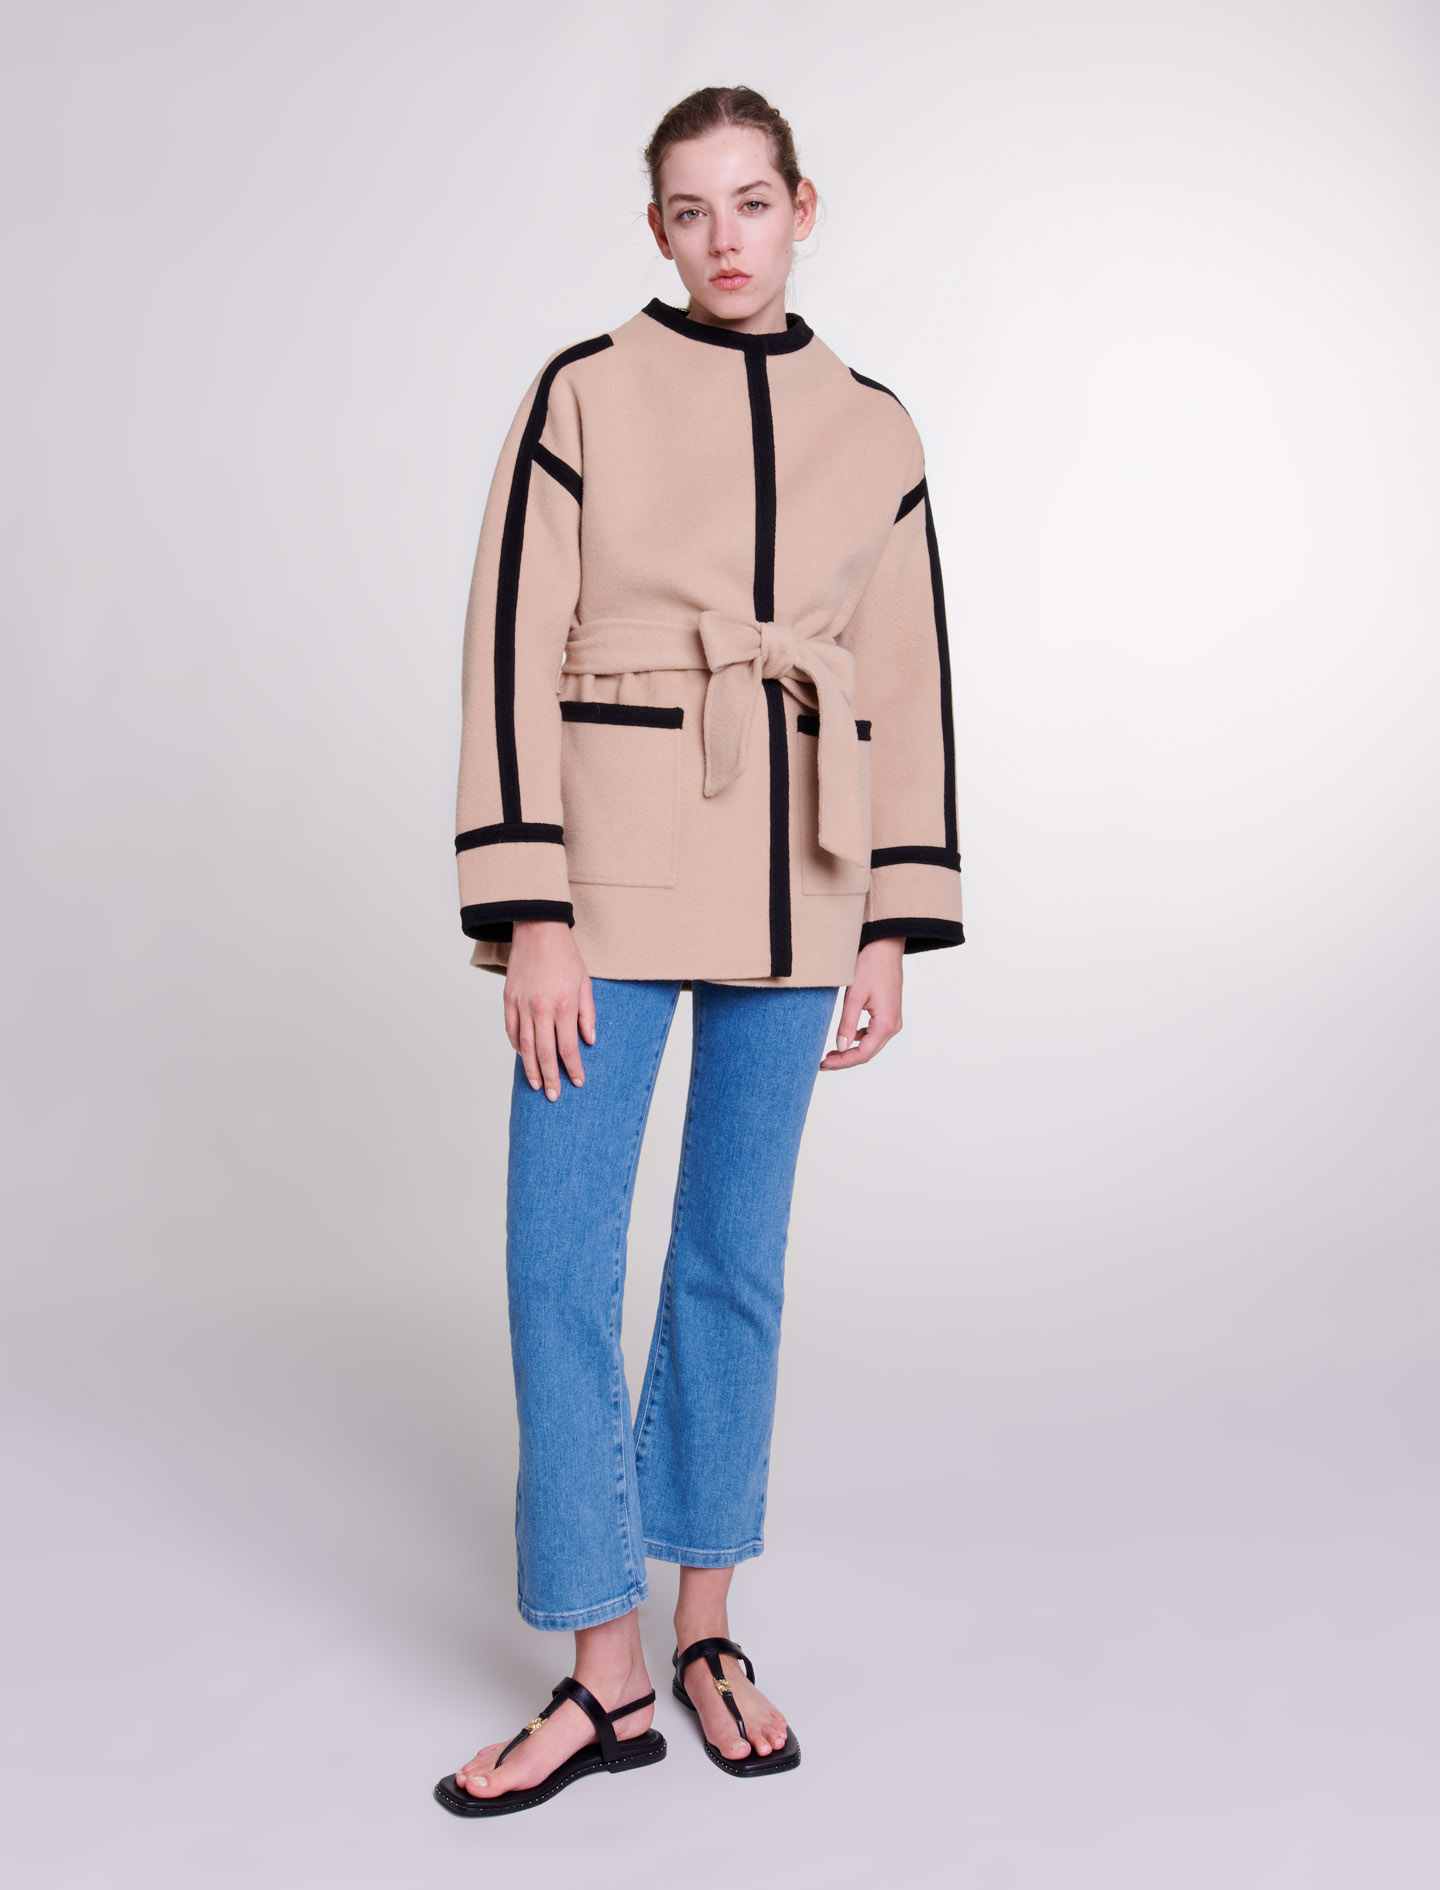 Maje Woman's wool, 123GICOLORA for Spring/Summer, in color Camel / Brown